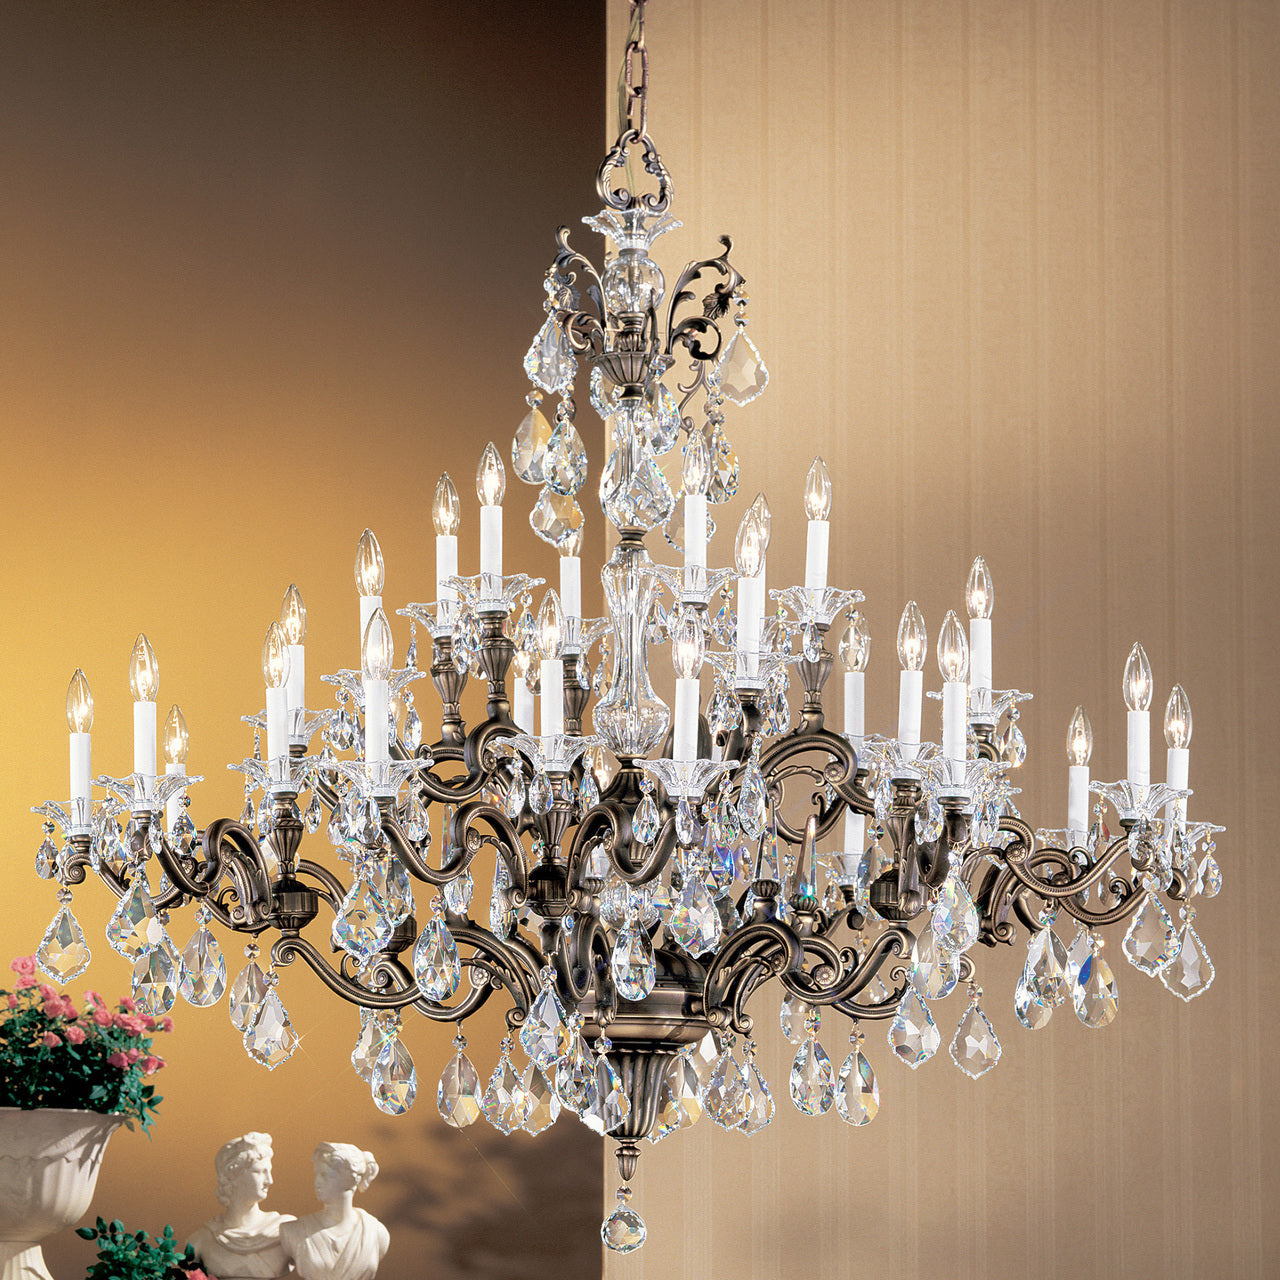 Classic Lighting 57130 RB SC Via Firenze Crystal Chandelier in Roman Bronze (Imported from Spain)